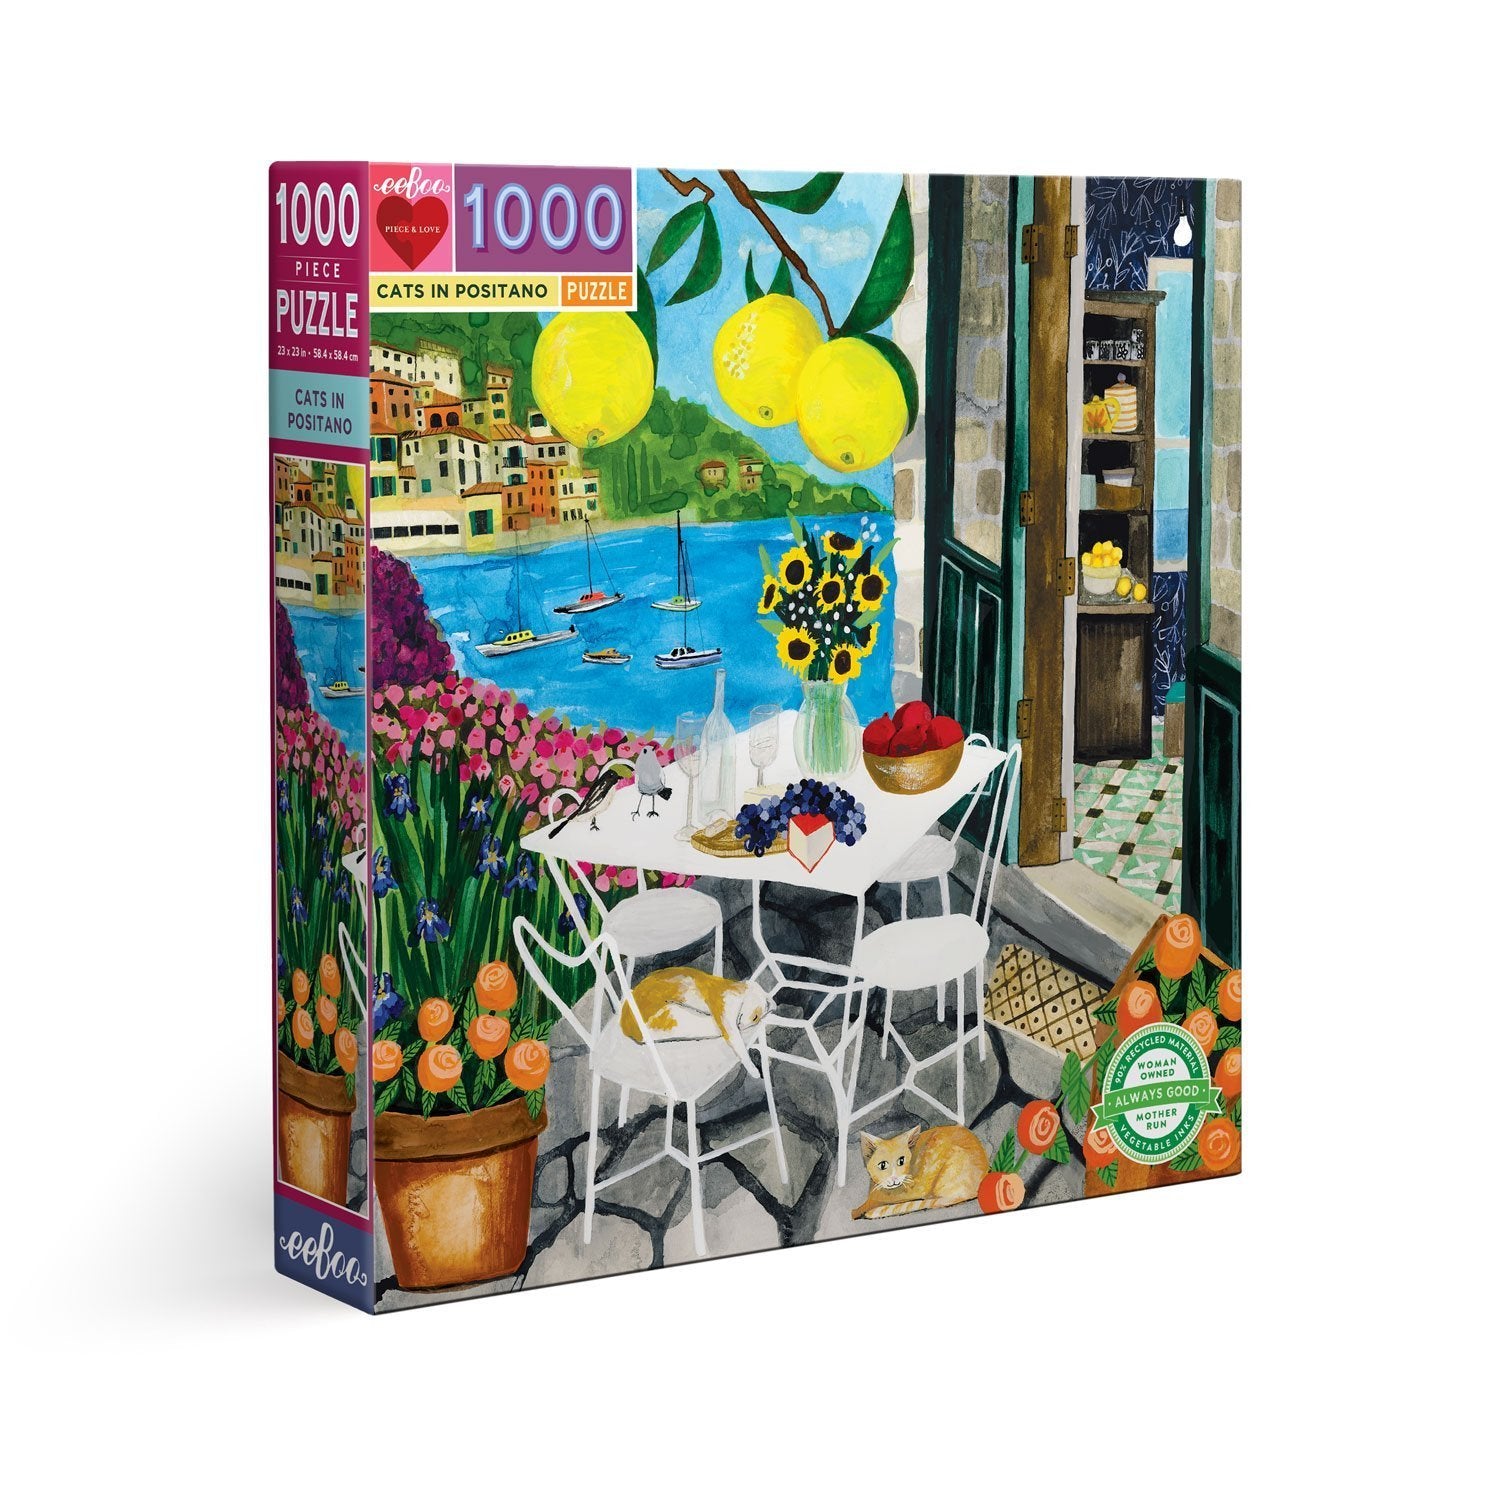 Cats in Positano 1000 Piece Puzzle - Heart of the Home PA